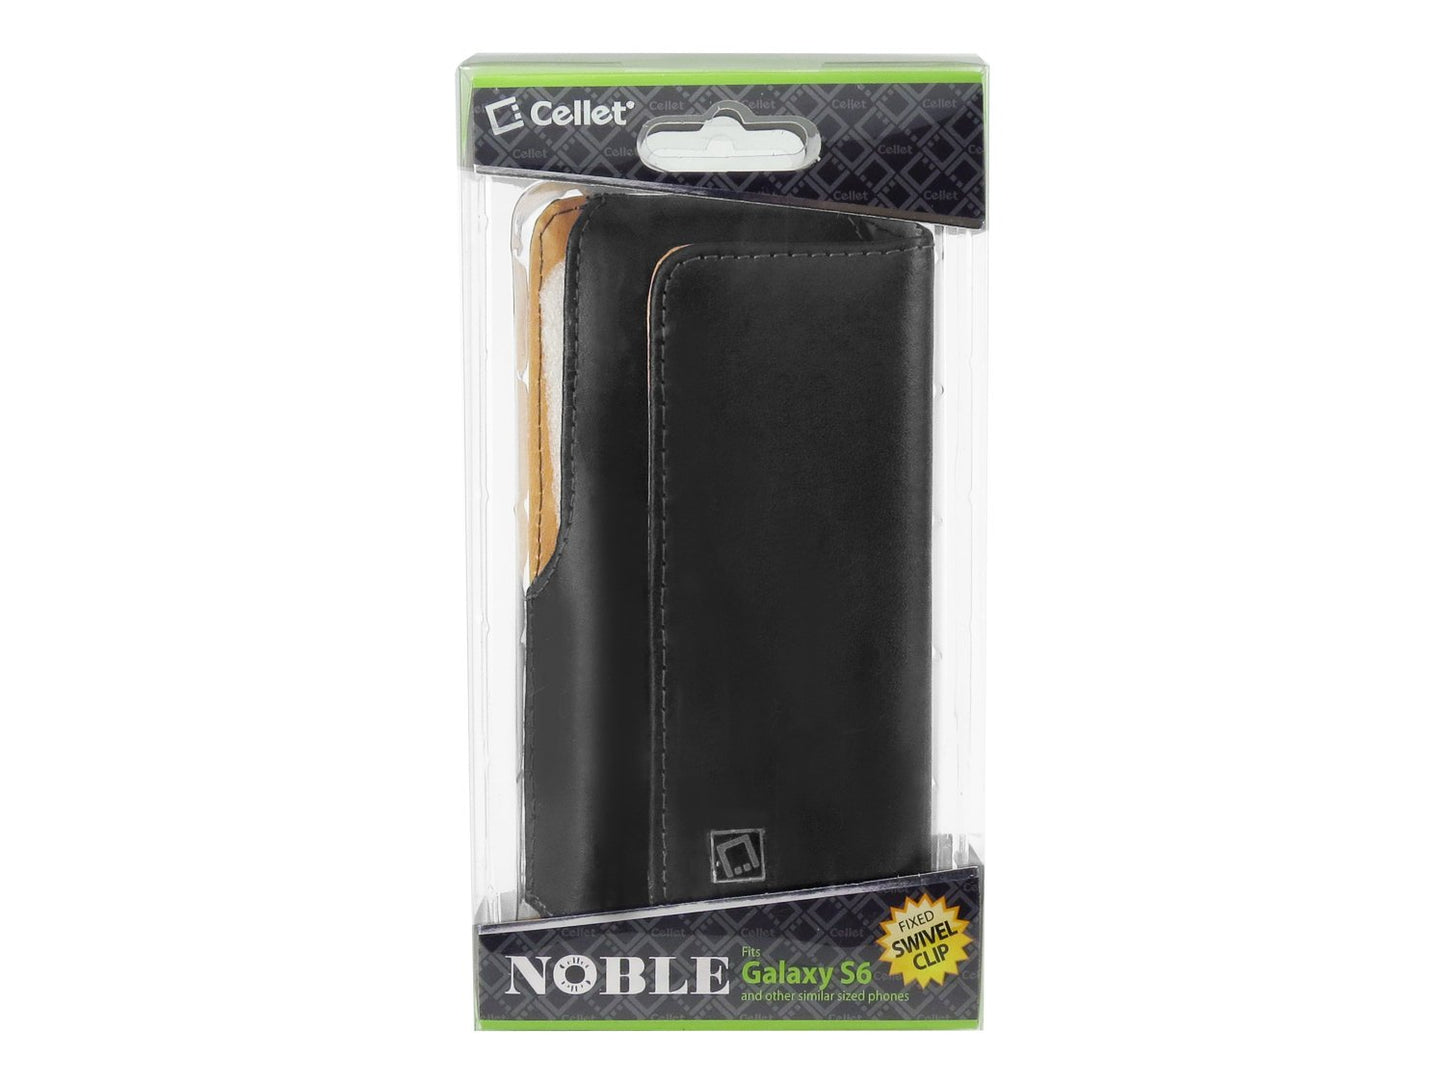 NOBLES6 - Cellet Noble Case for Samsung Galaxy S8 S7 S6, iPhone 8, 7, 6 with Fixed Heavy Duty 360 Degree Swivel Clip